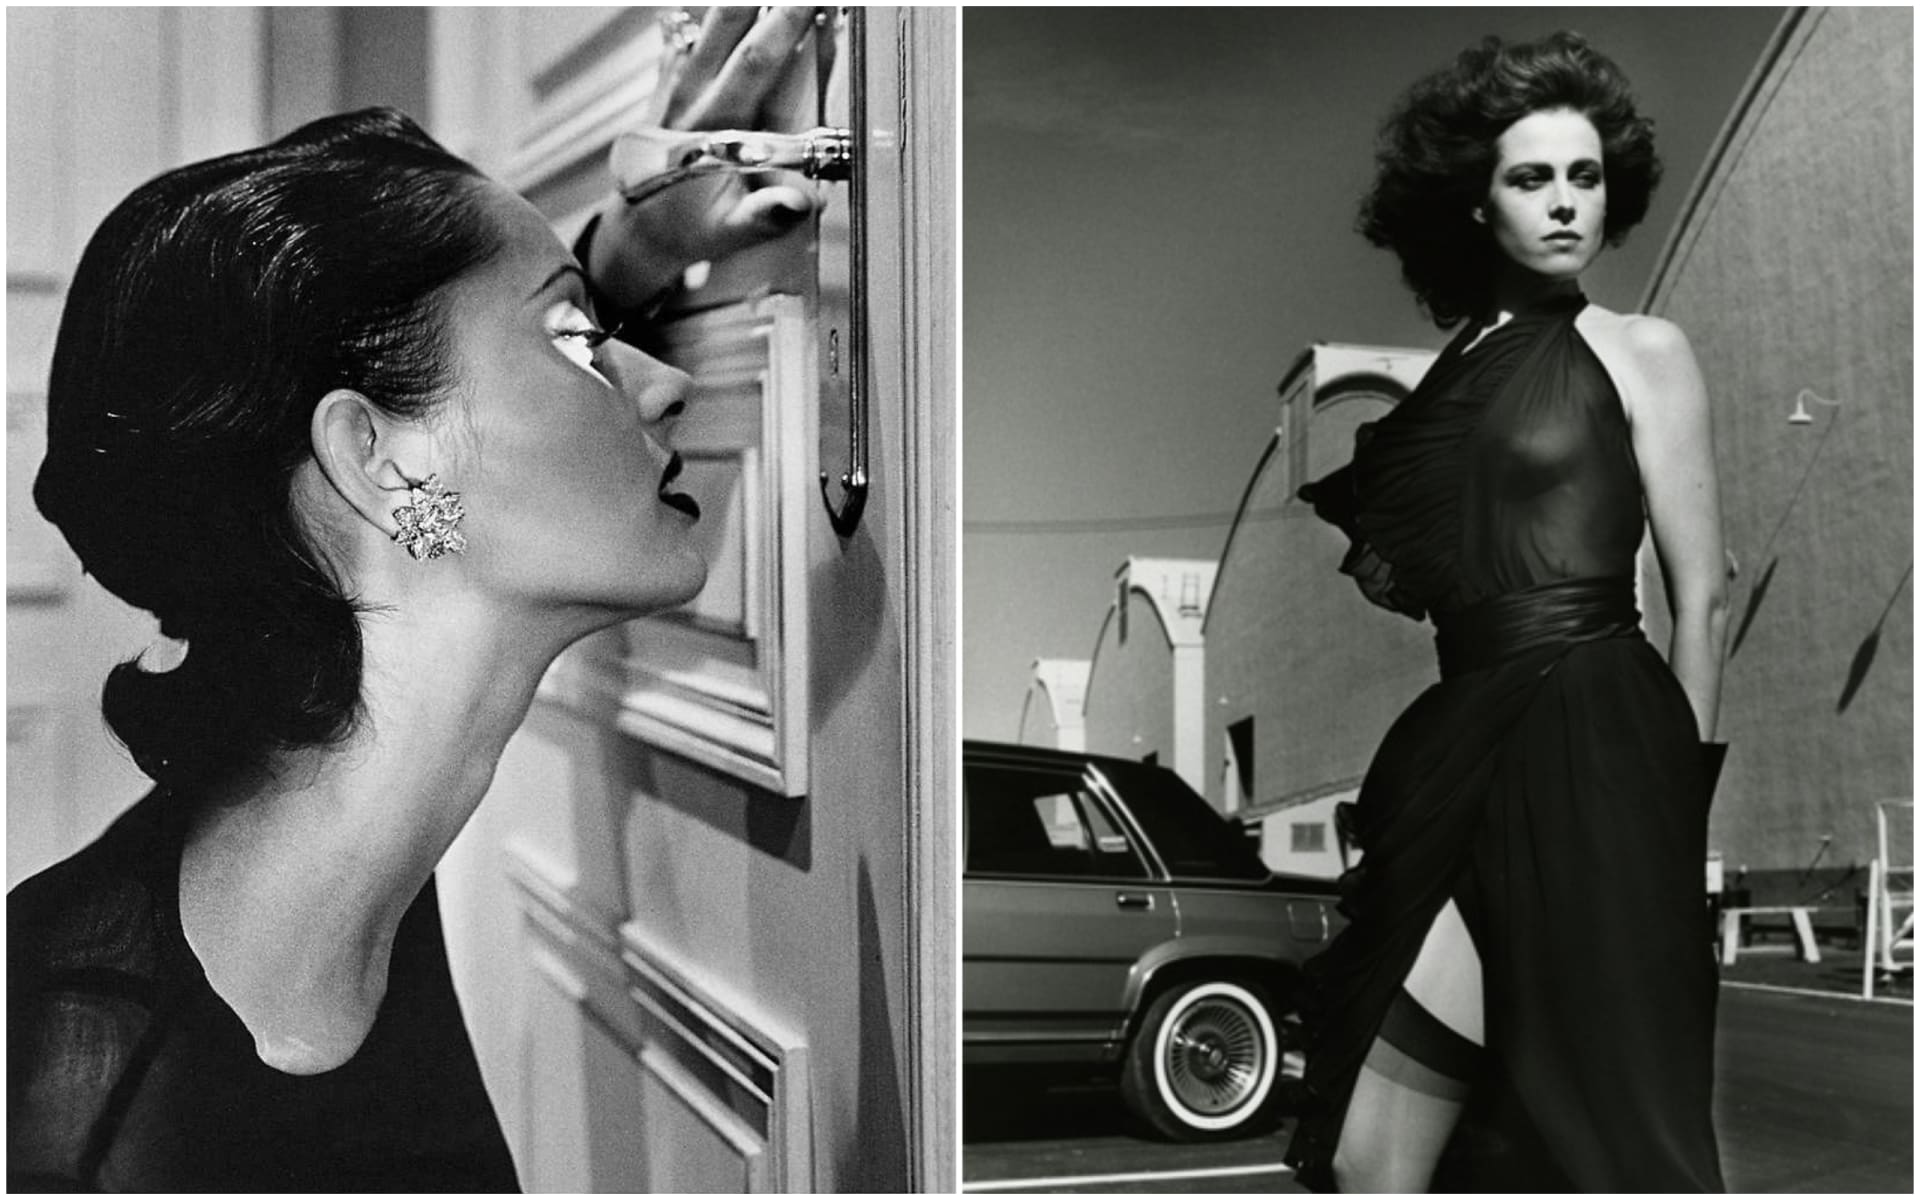 Helmut Newton in Dialogue. Fashions and Fictions